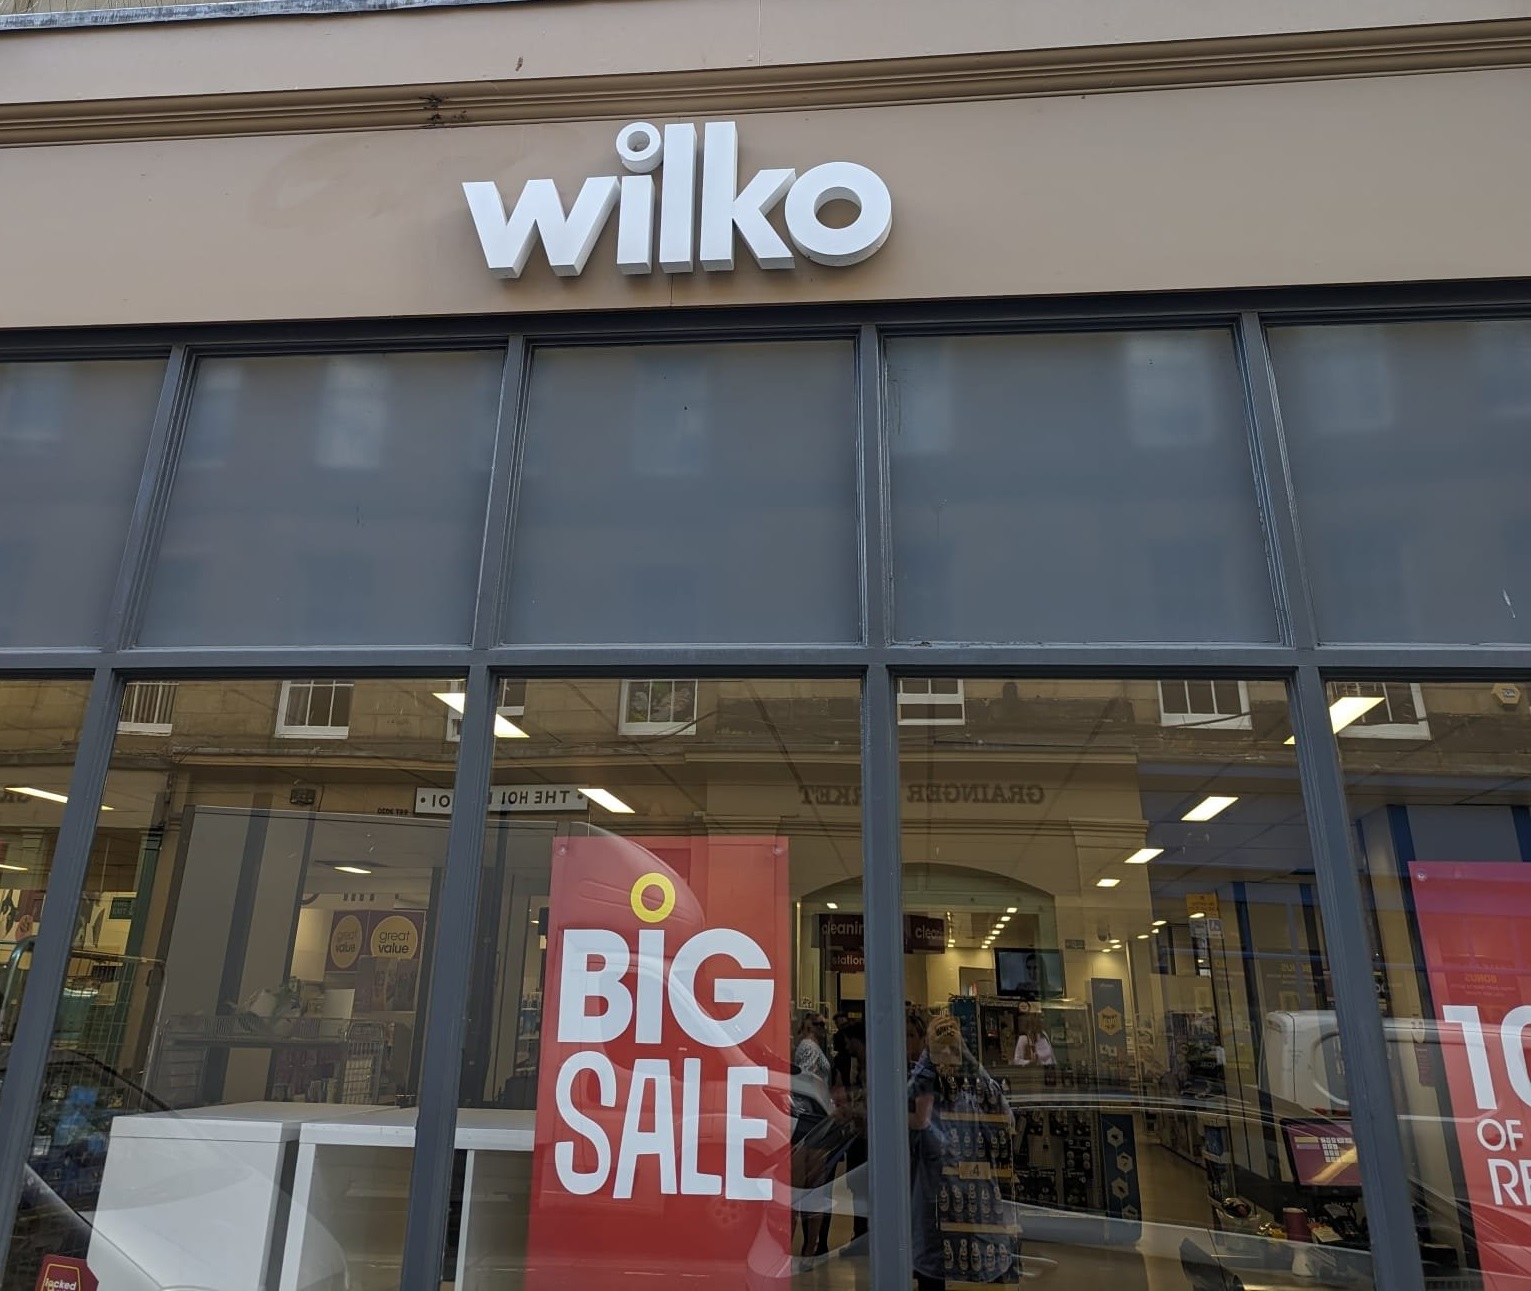 Really sad to hear Wilko has gone into administration